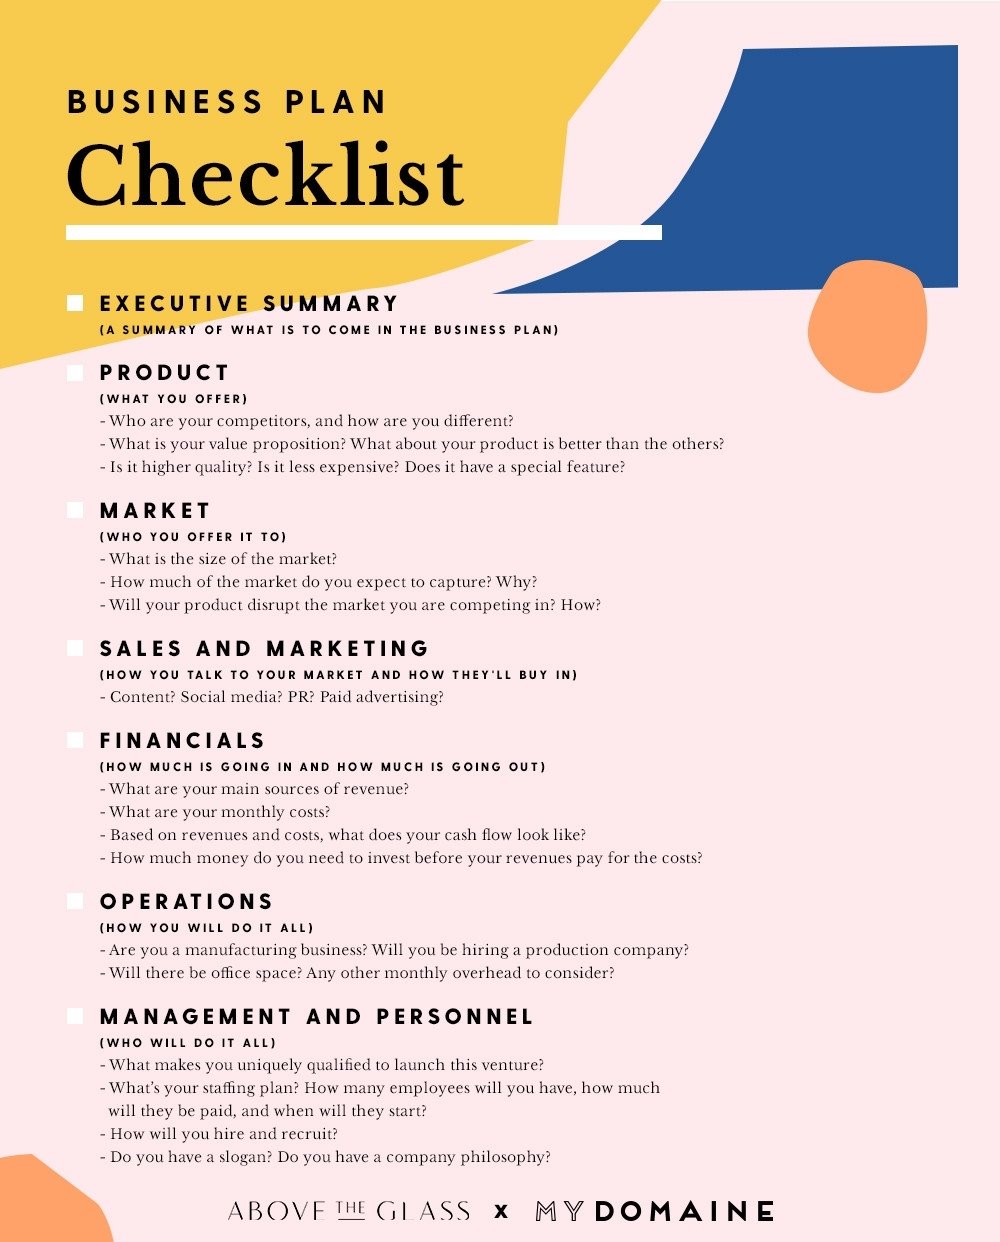 10 Perfect How To Turn An Idea Into A Business this checklist will turn a great idea into a successful business 2022